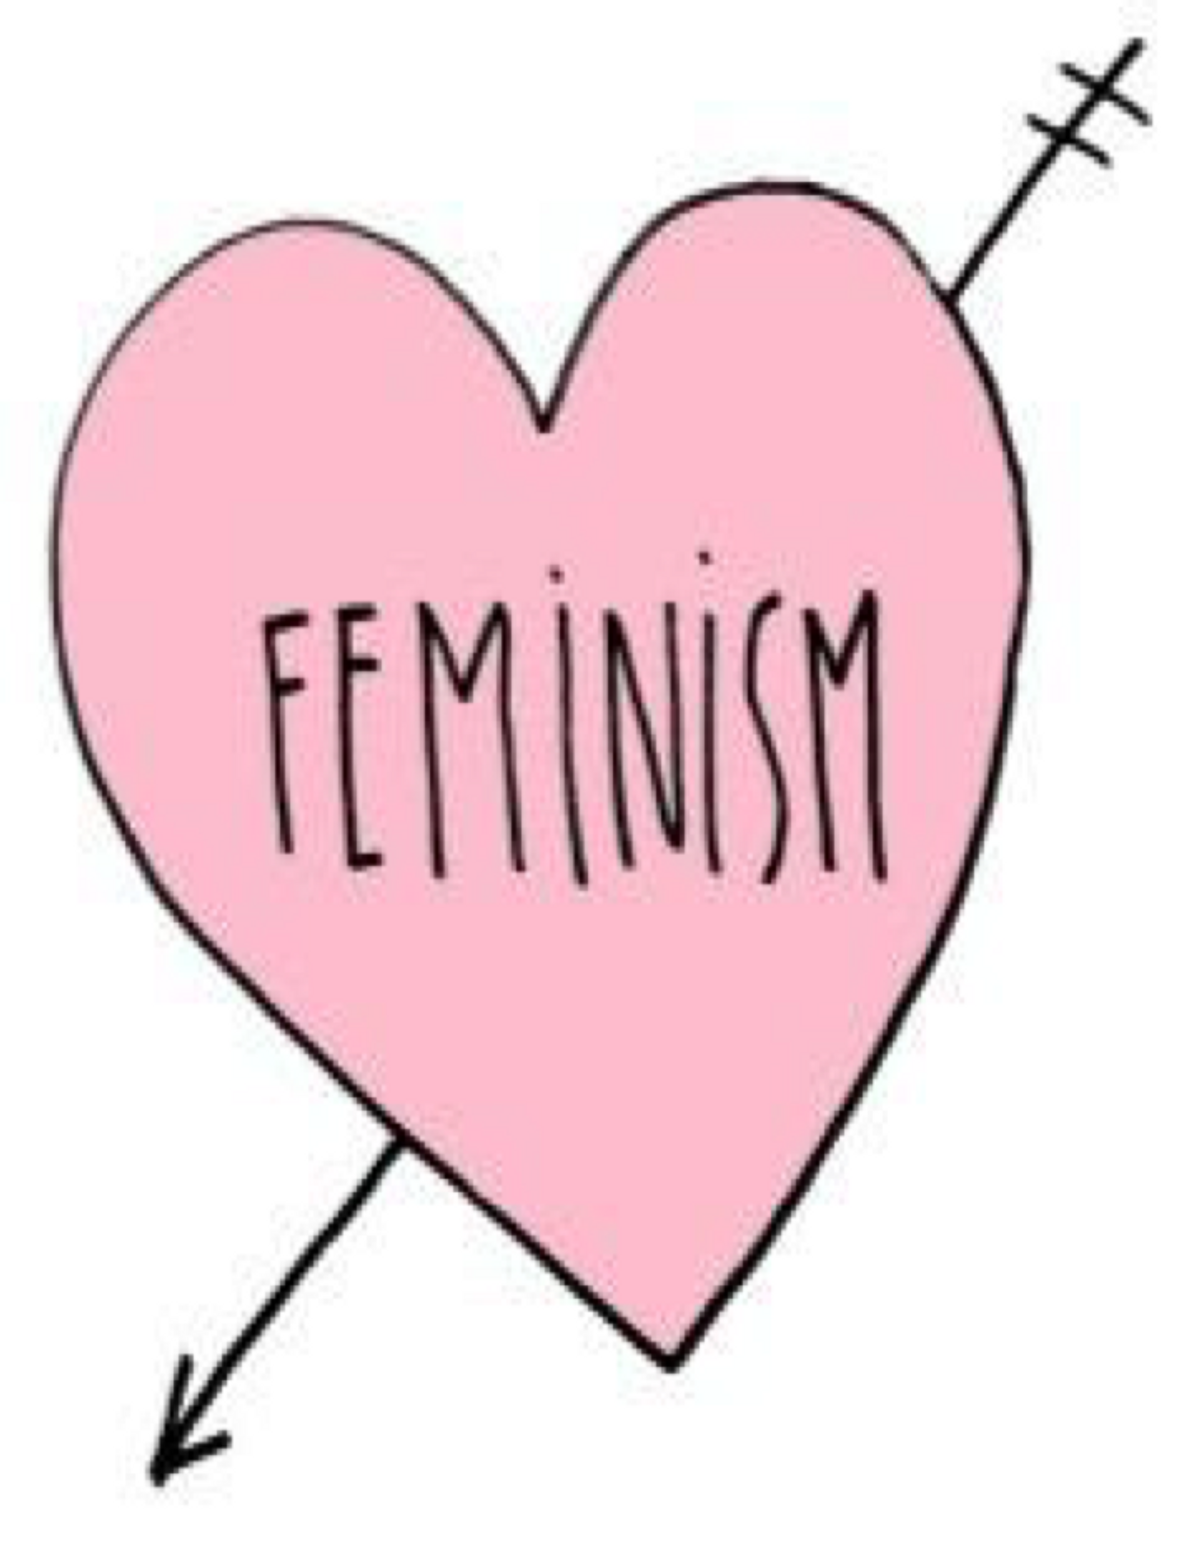 Five Reasons No One Should Be Against Feminism